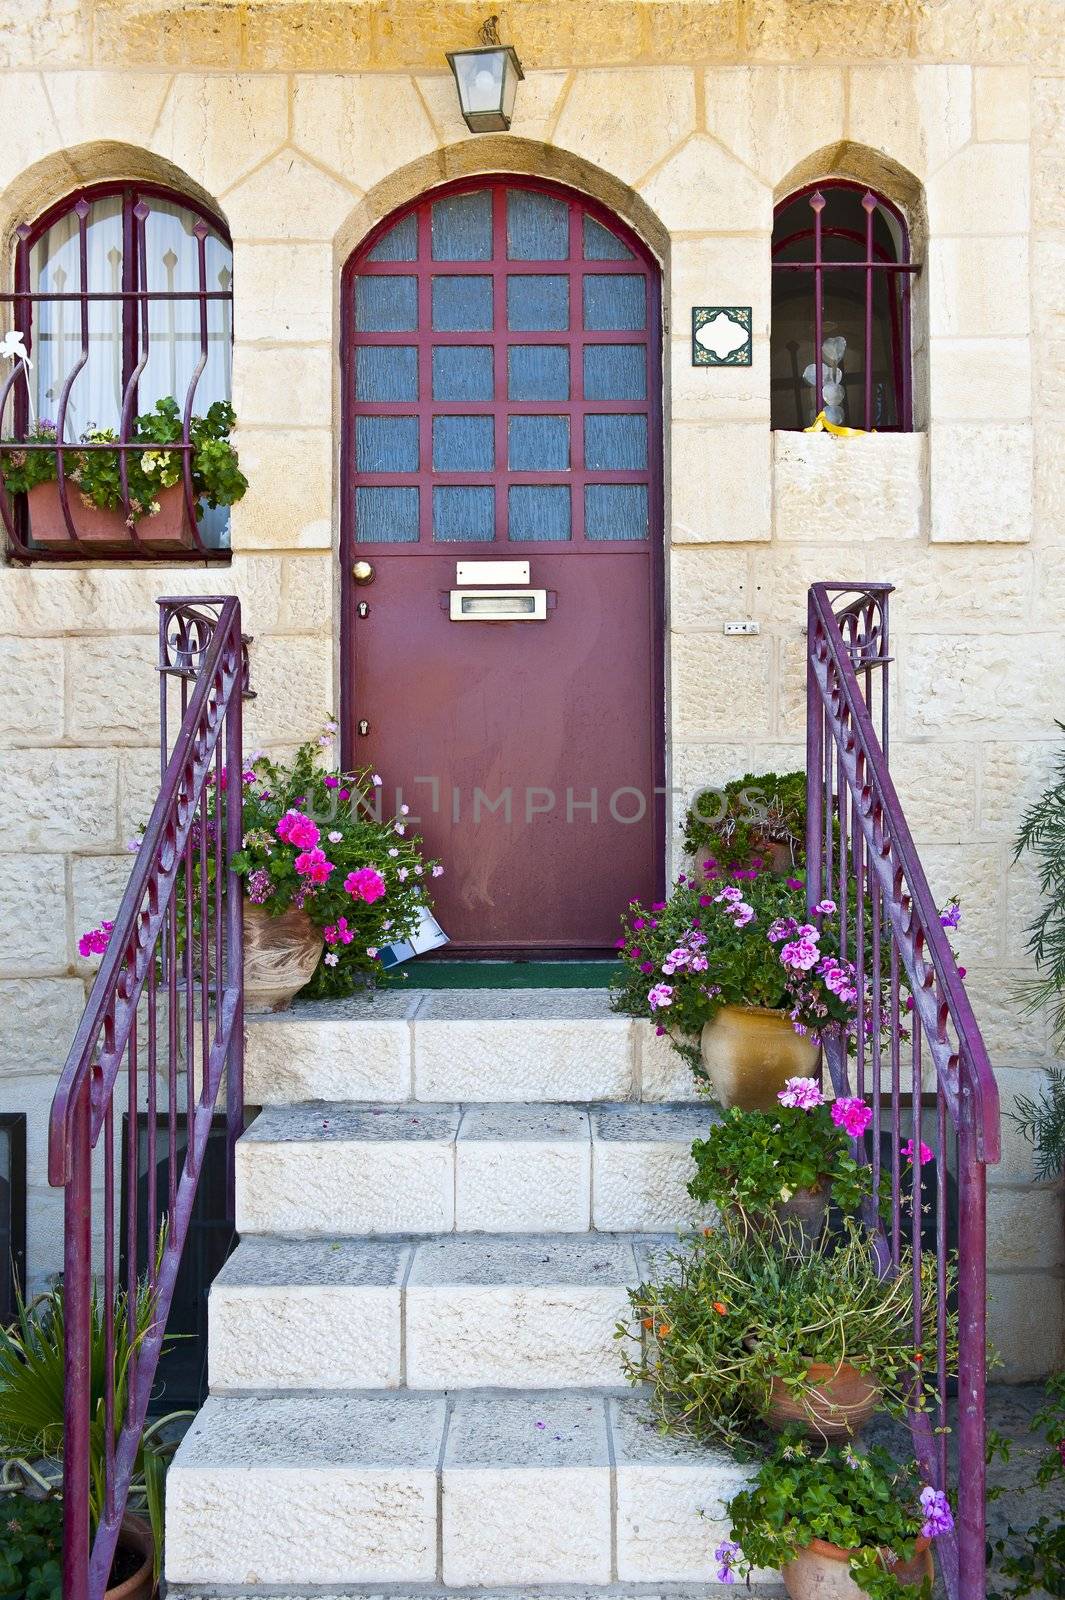 Detail of the Facade of Israel Home Decorated with Flowers